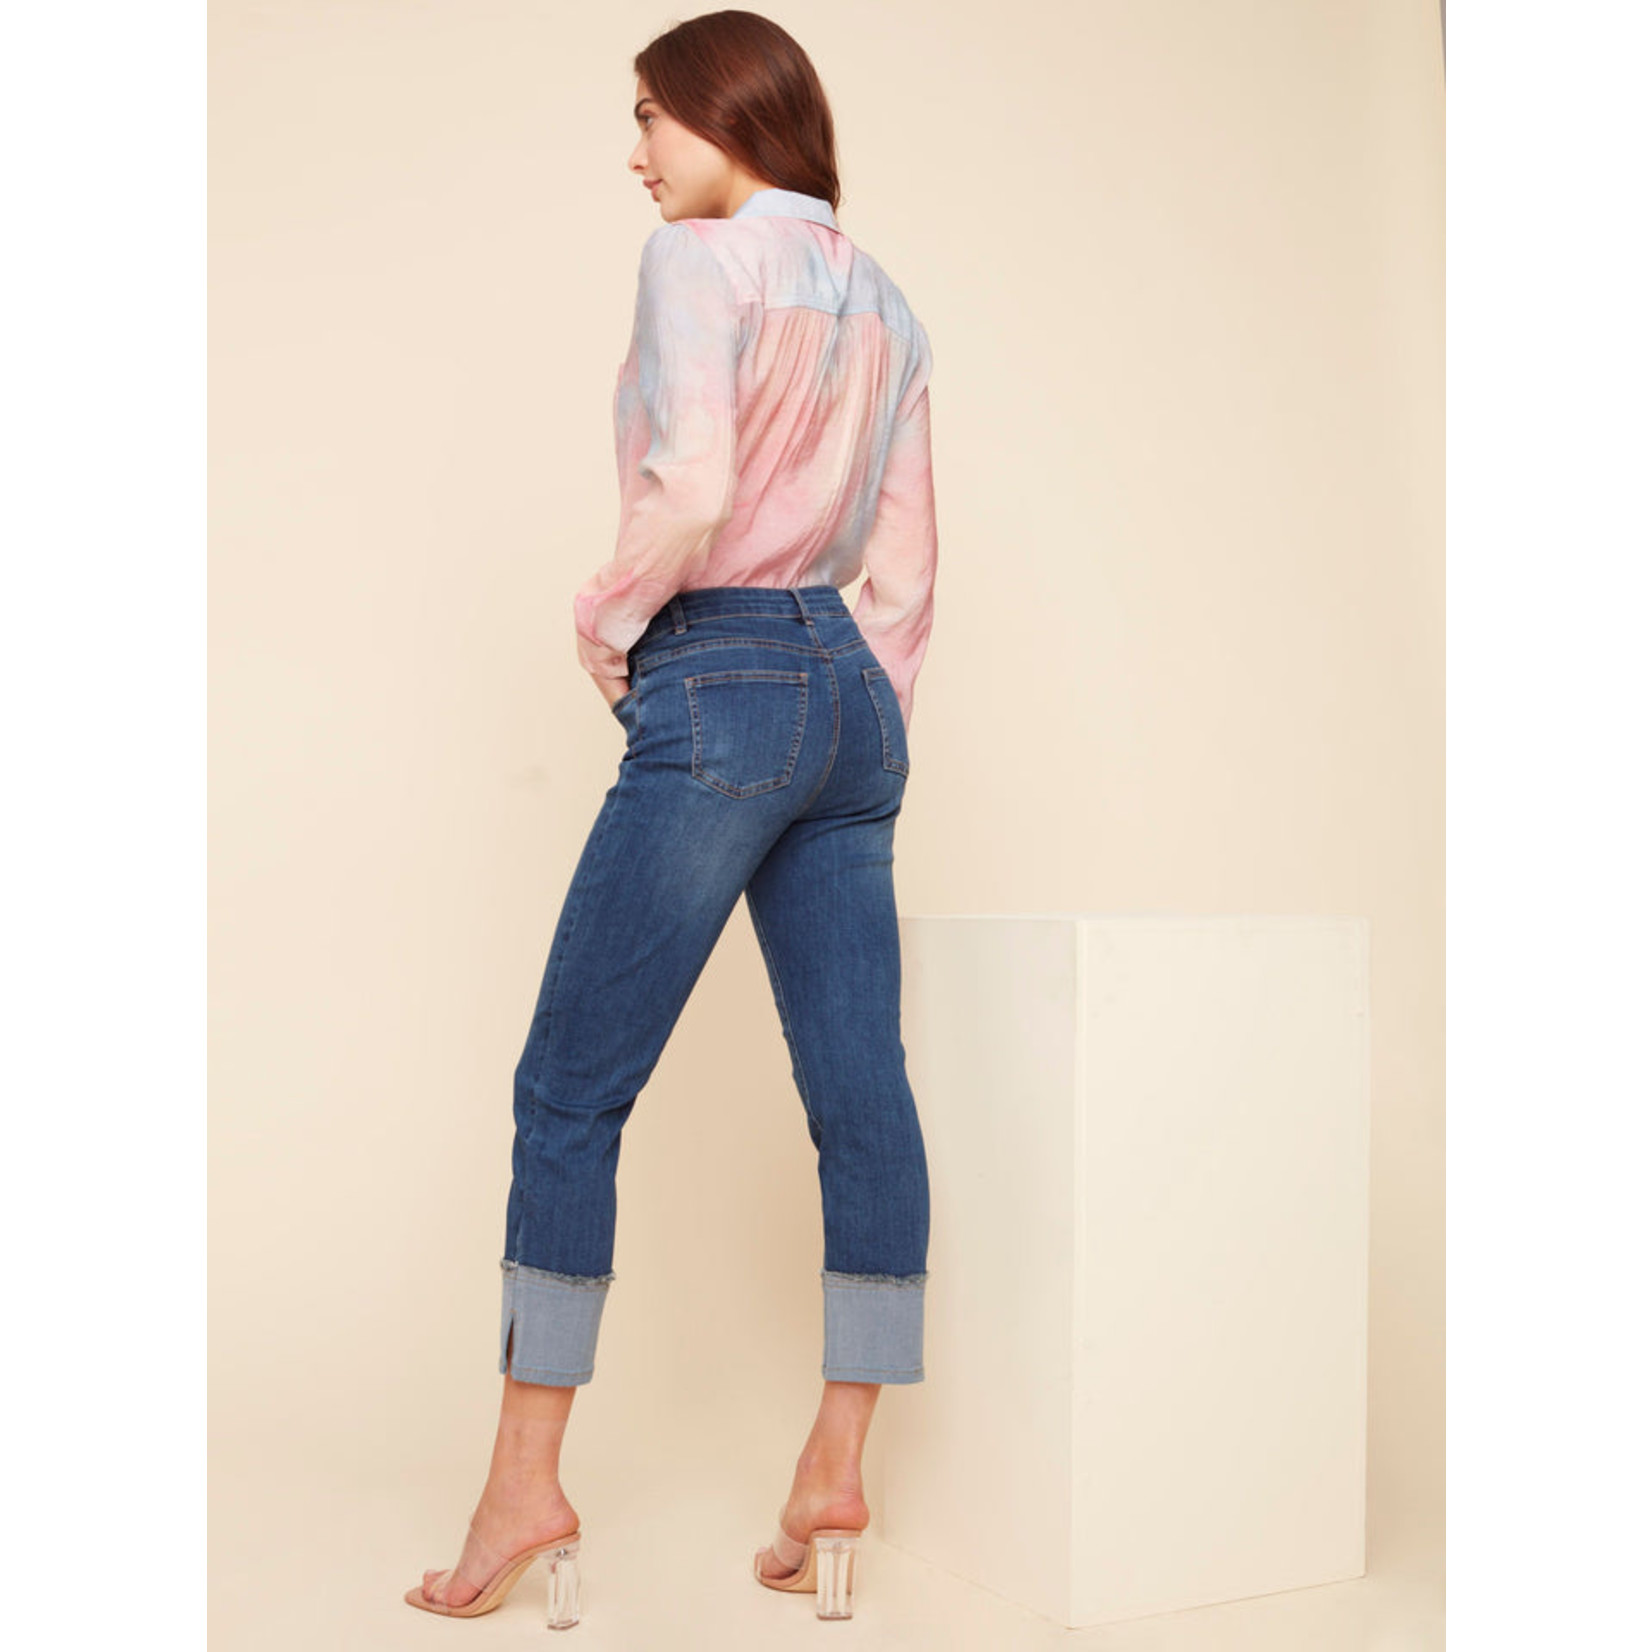 Charlie B Denim Pant with Cuff Details